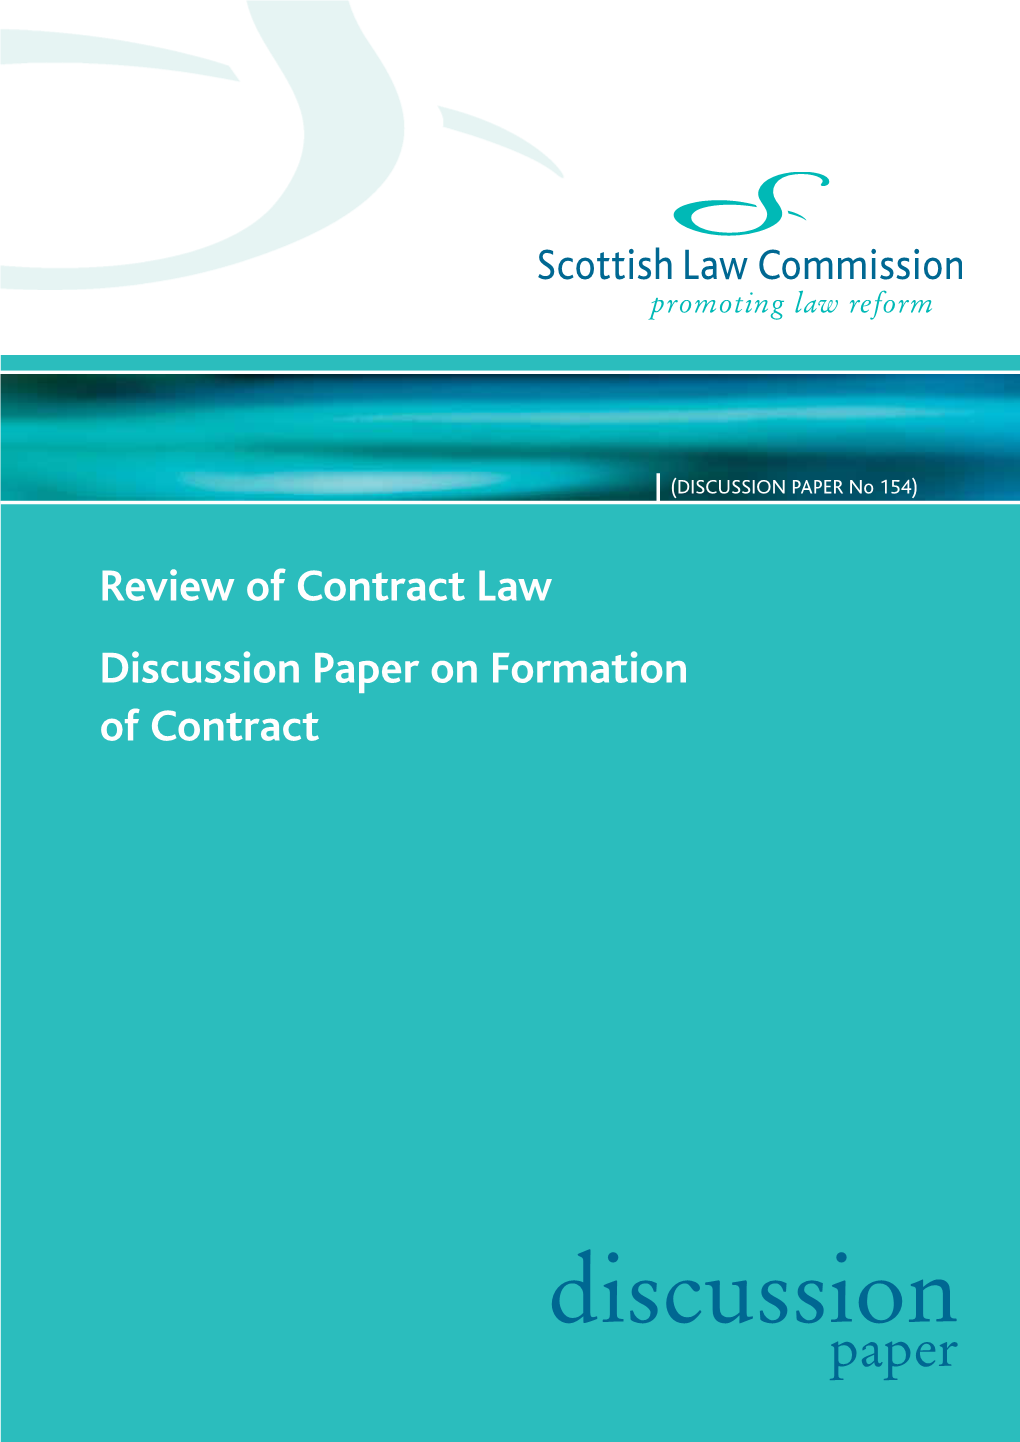 Review of Contract Law Discussion Paper on Formation of Contract